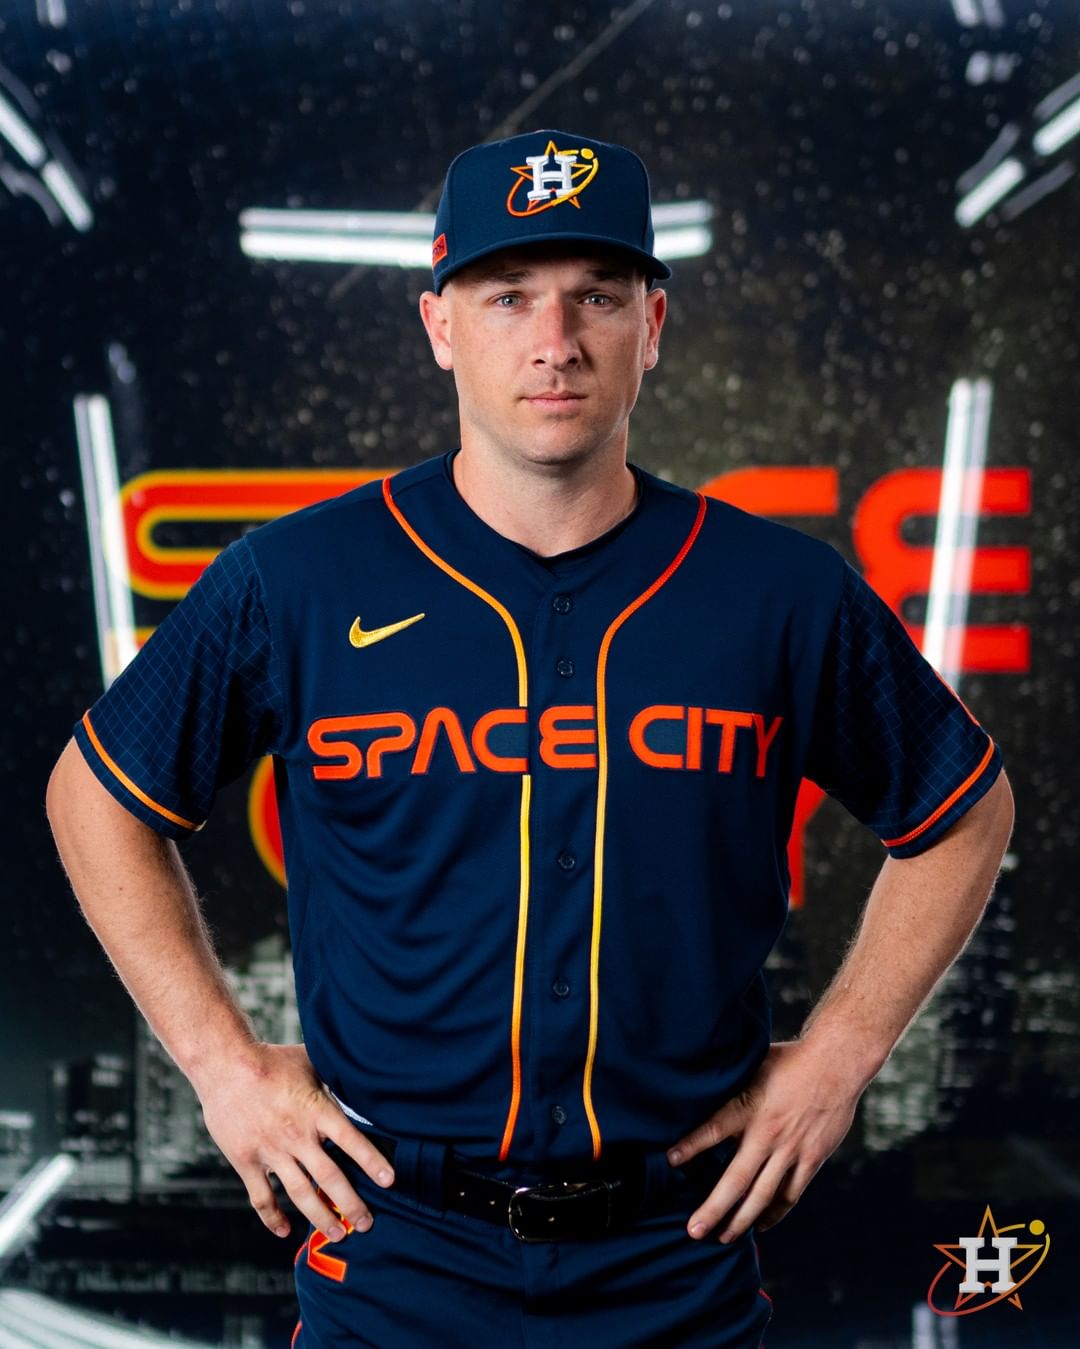 Houston Astros - Our #SpaceCity uniform is about going